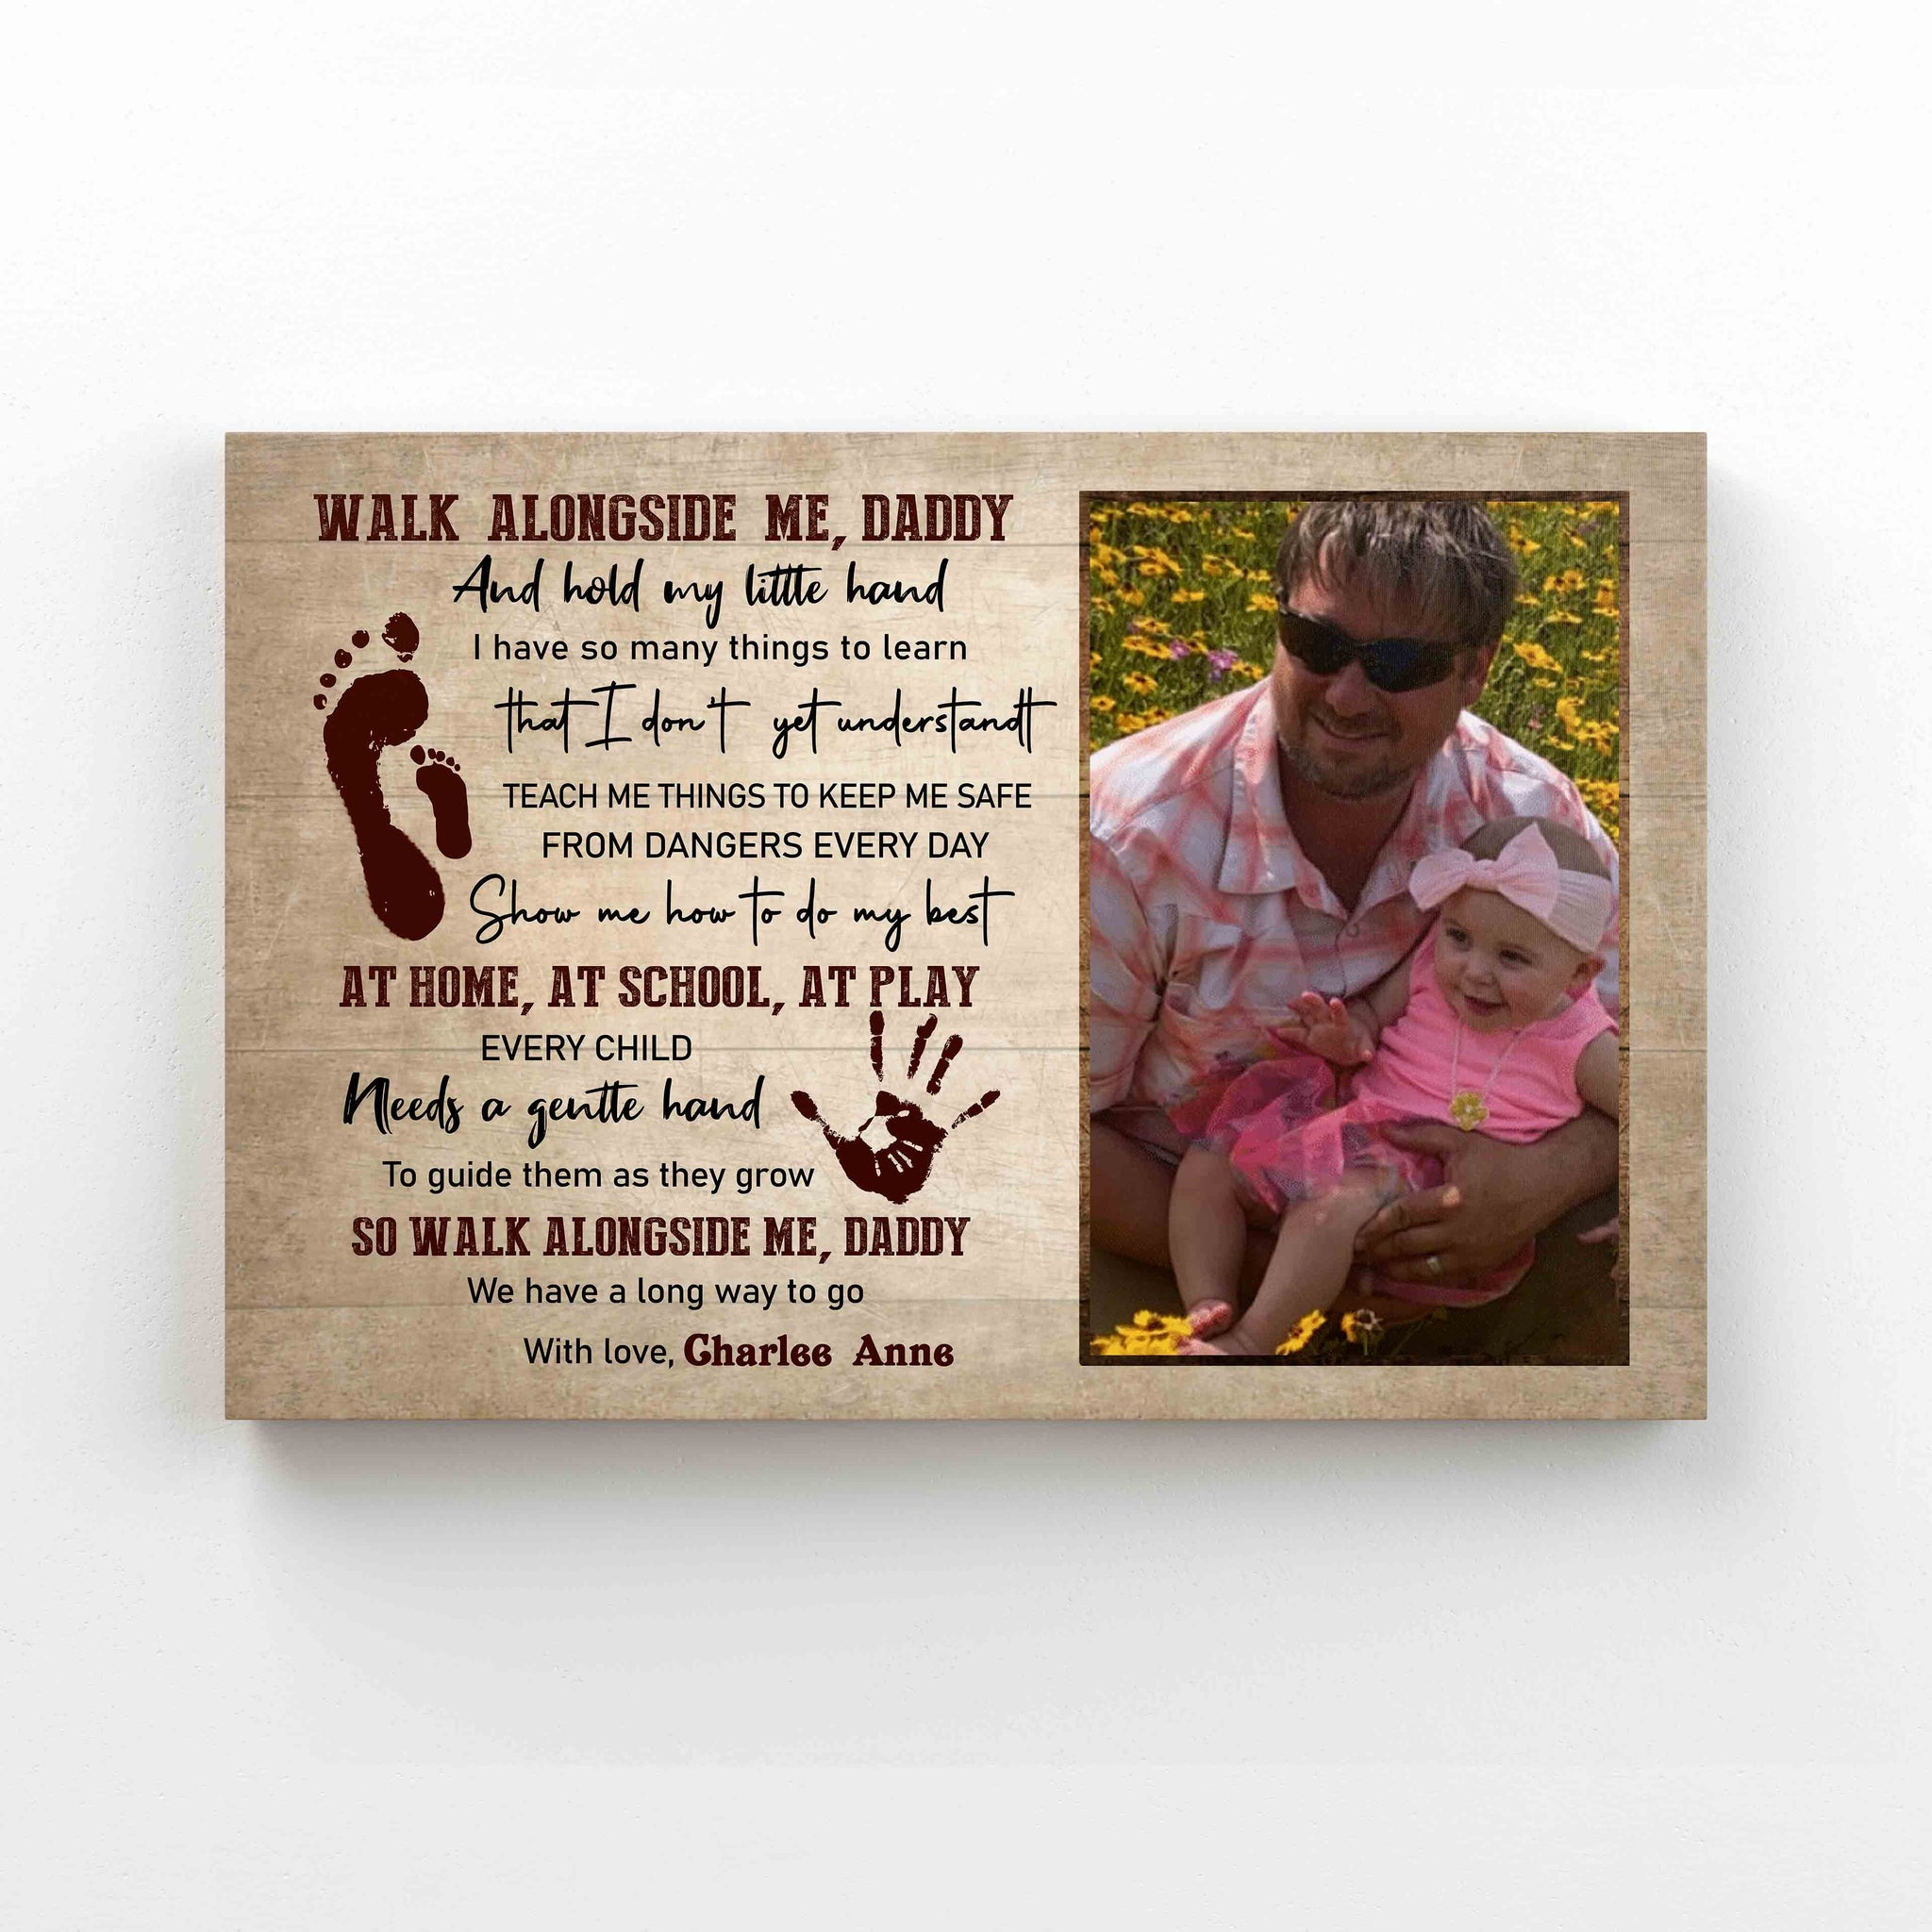 Personalized Image Canvas, Walk Alongside Me Daddy Canvas, Family Canvas, Custom Name Canvas